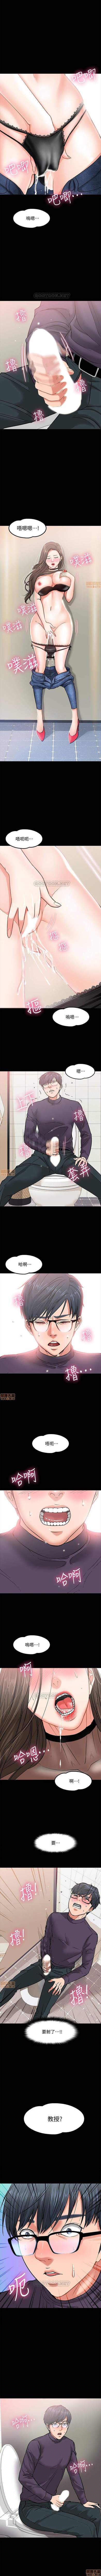 PROFESSOR, ARE YOU JUST GOING TO LOOK AT ME? | DESIRE SWAMP | 教授，你還等什麼? Ch. 3Manhwa 7